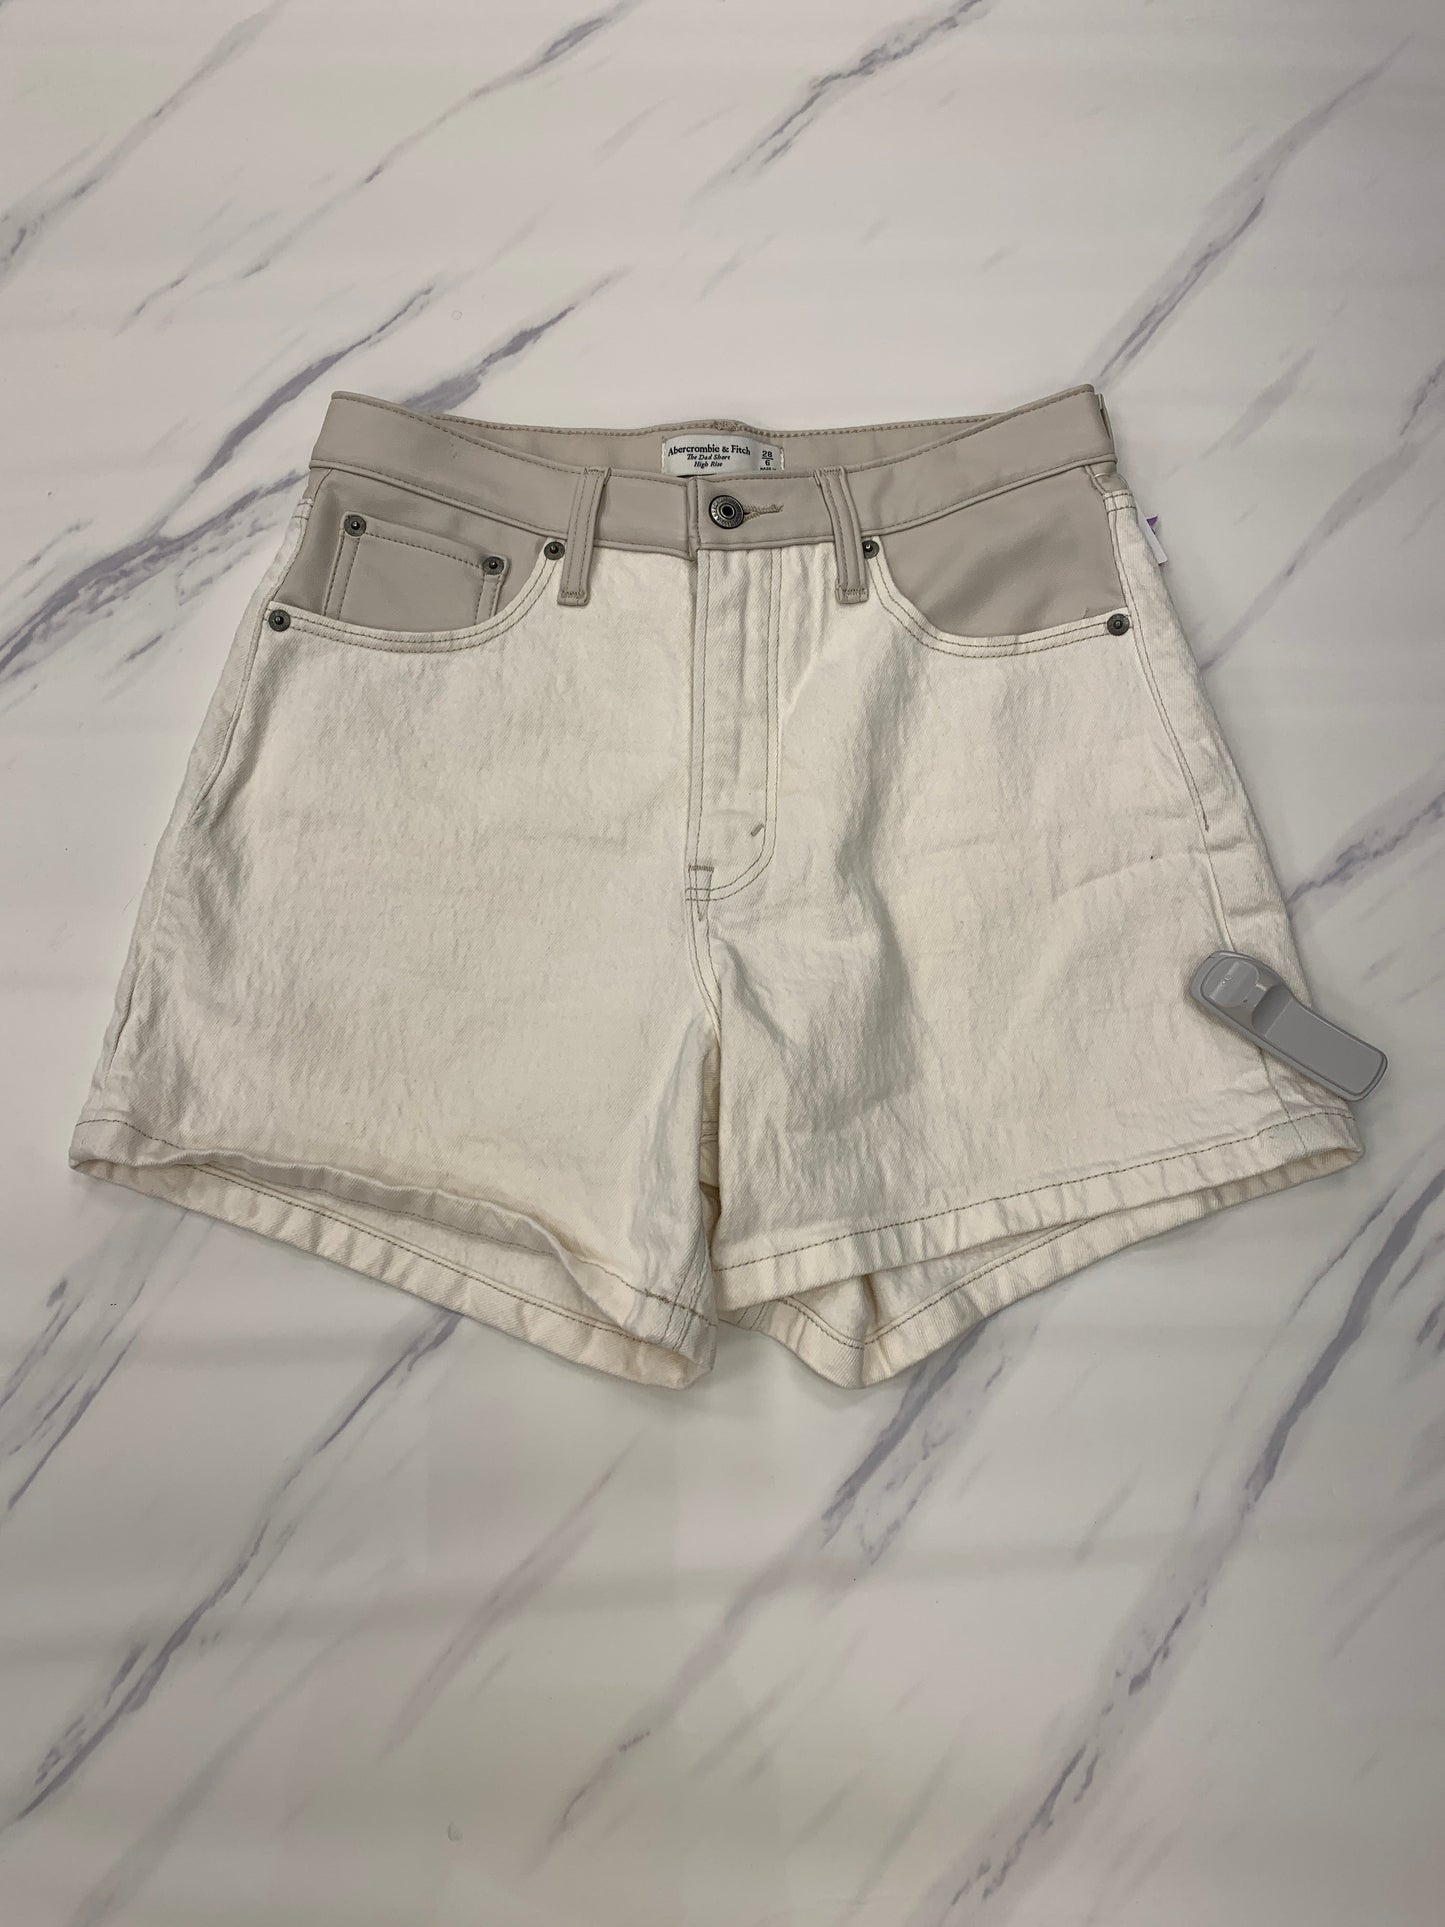 Shorts Abercrombie And Fitch, Size 6